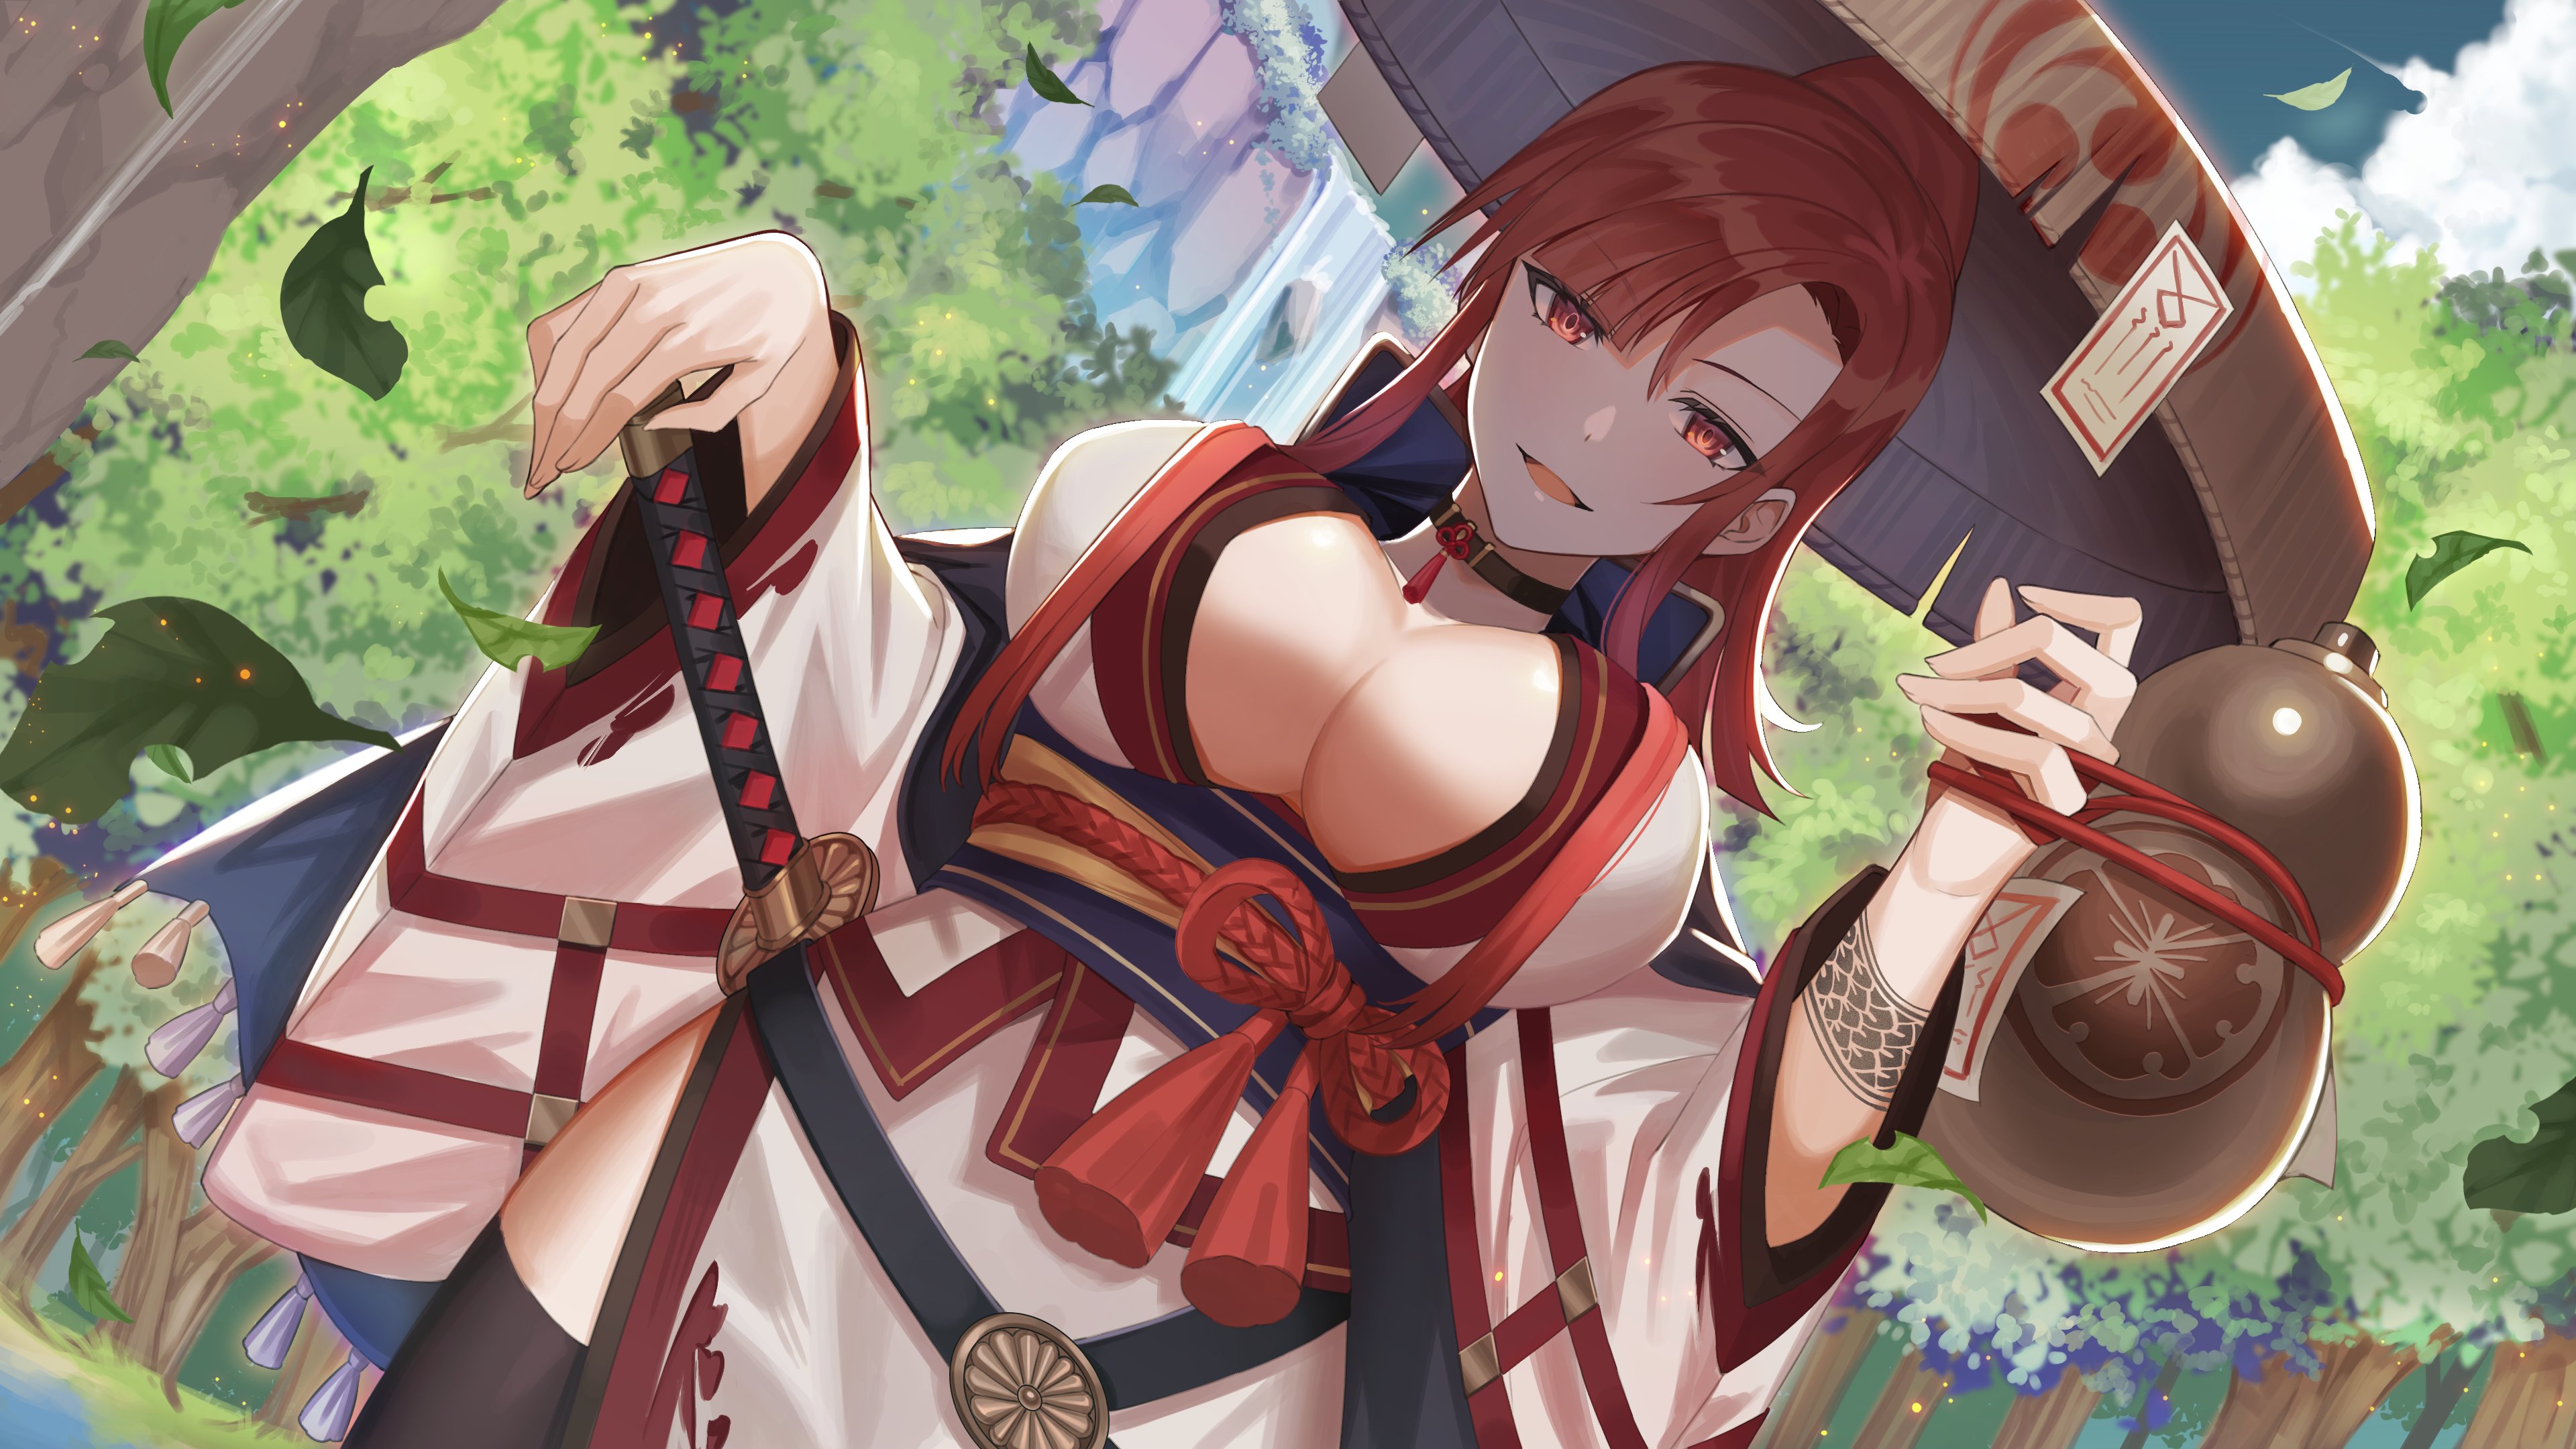 Anime 3840x2160 anime anime girls big boobs women with swords sword leaves cleavage Japanese clothes hat redhead red eyes artwork Amahara Subaru